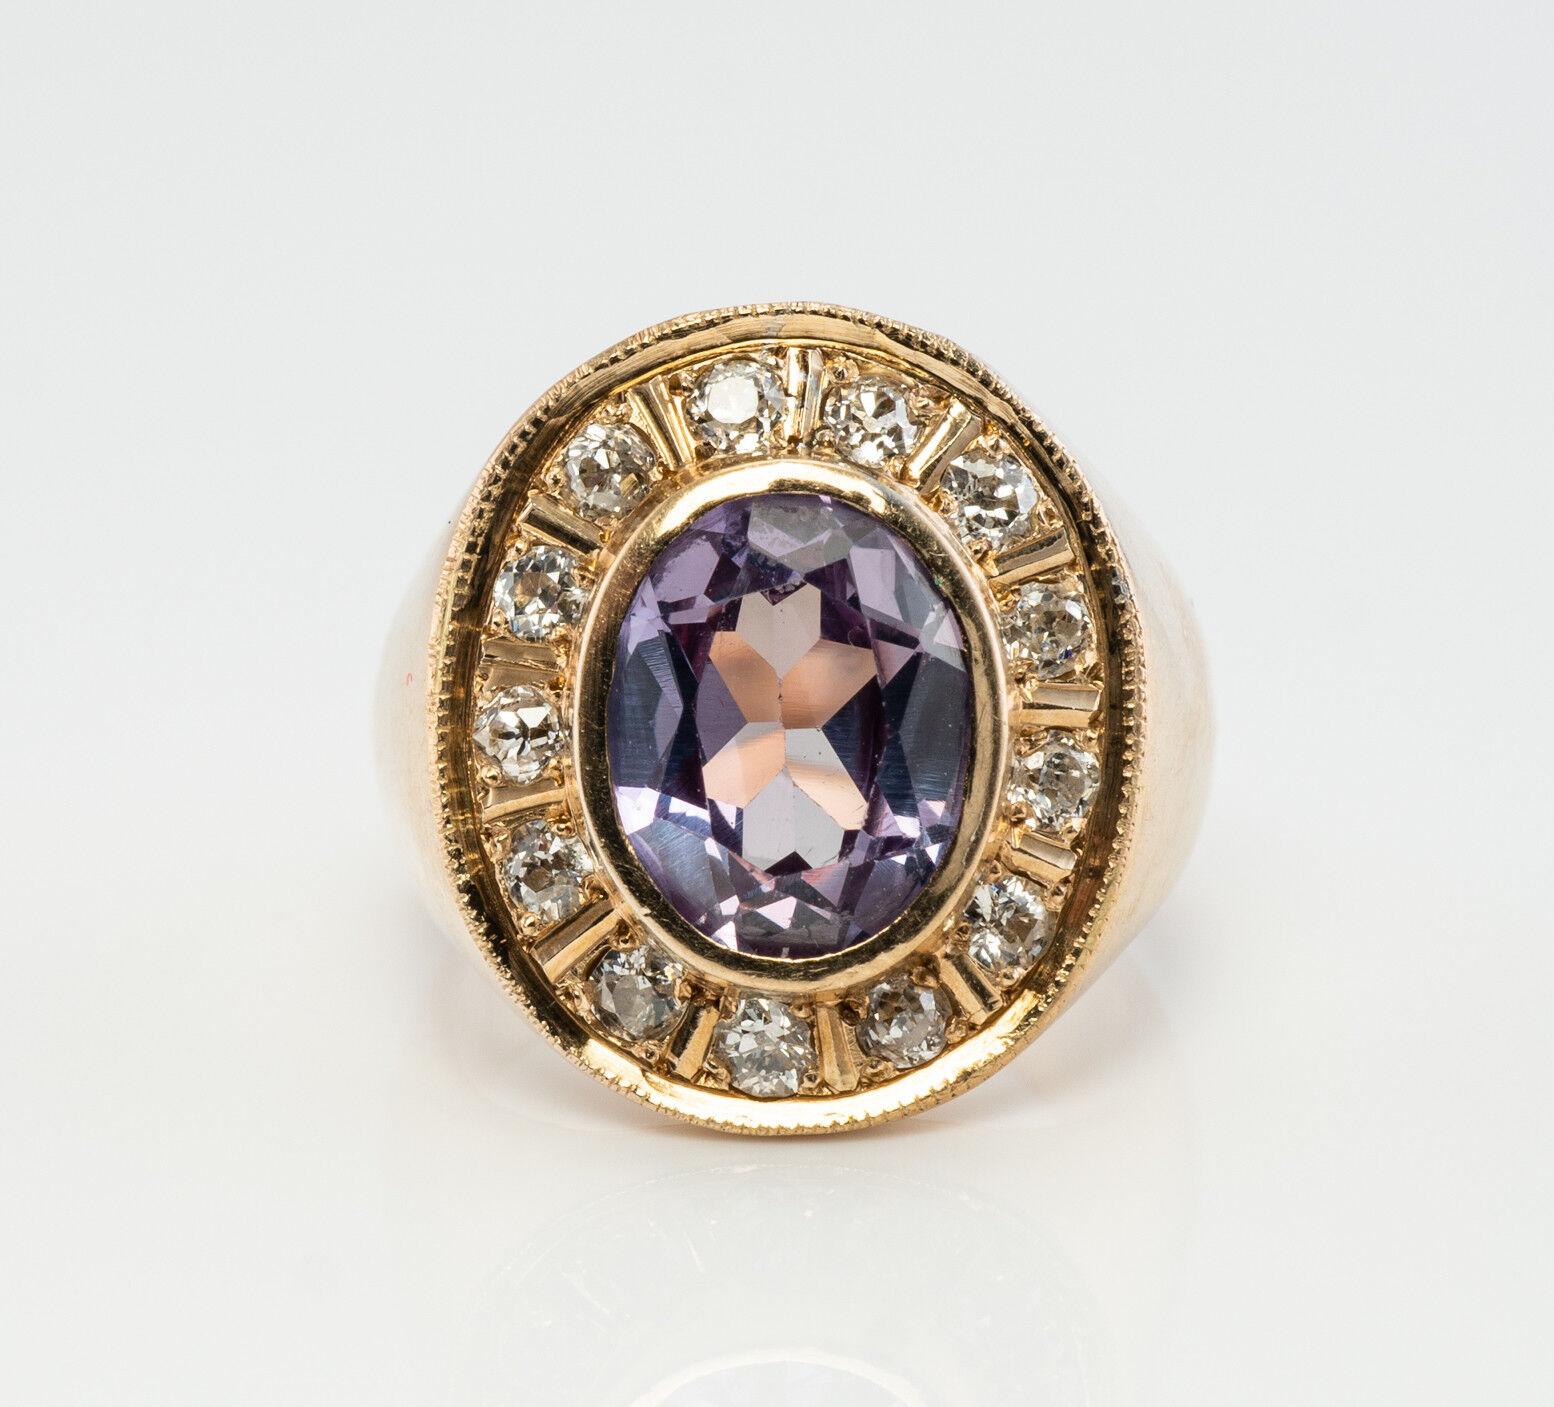 Diamond Amethyst Ring 14K Gold Band Vintage Estate

This vintage ring is crafted in solid 14K Yellow Gold (carefully tested and guaranteed). The center genuine Earth mined Amethyst measures 10mm x 8mm (2.40 carats). This is a very clean and